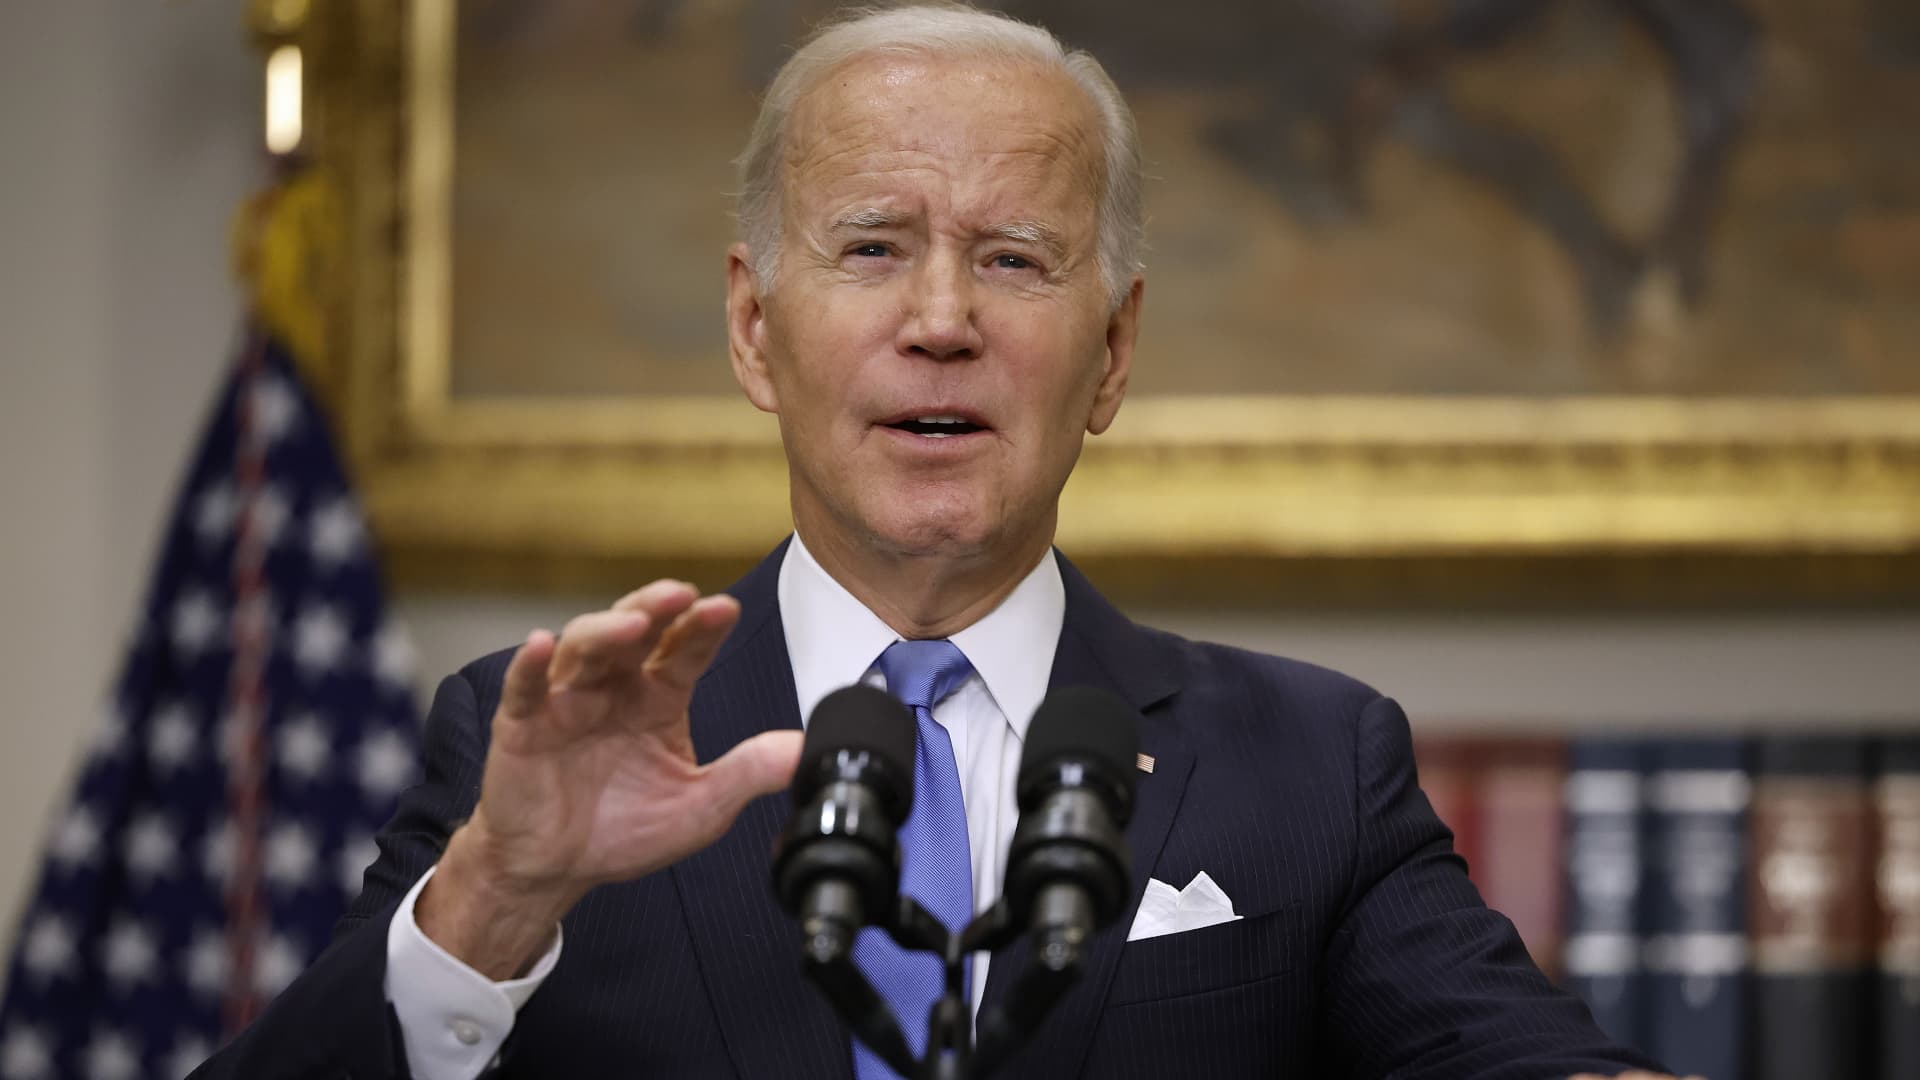 Biden warns Putin that U.S. will defend ‘every one inch’ of NATO territory as Russia formally annexes Ukraine locations